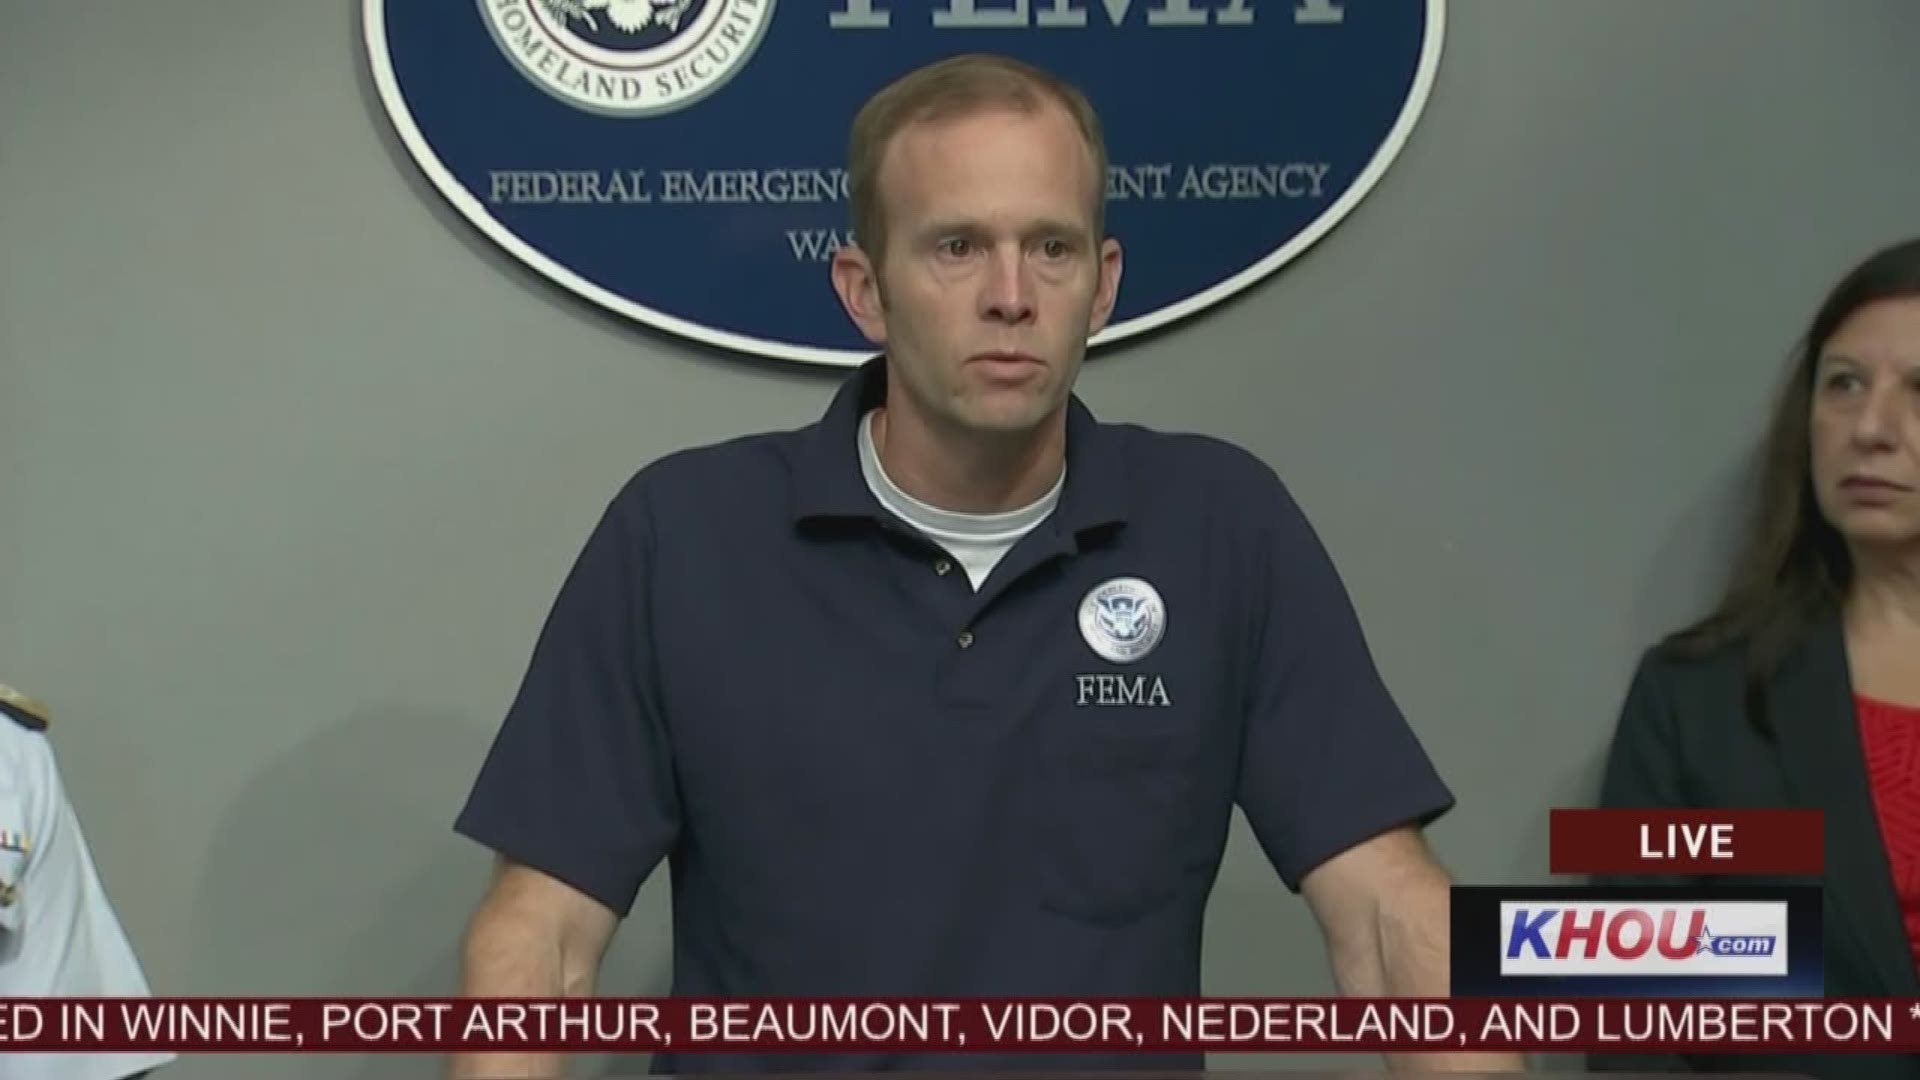 FEMA officials held a press conference Wednesday morning to provide an update on the Houston flood situation.